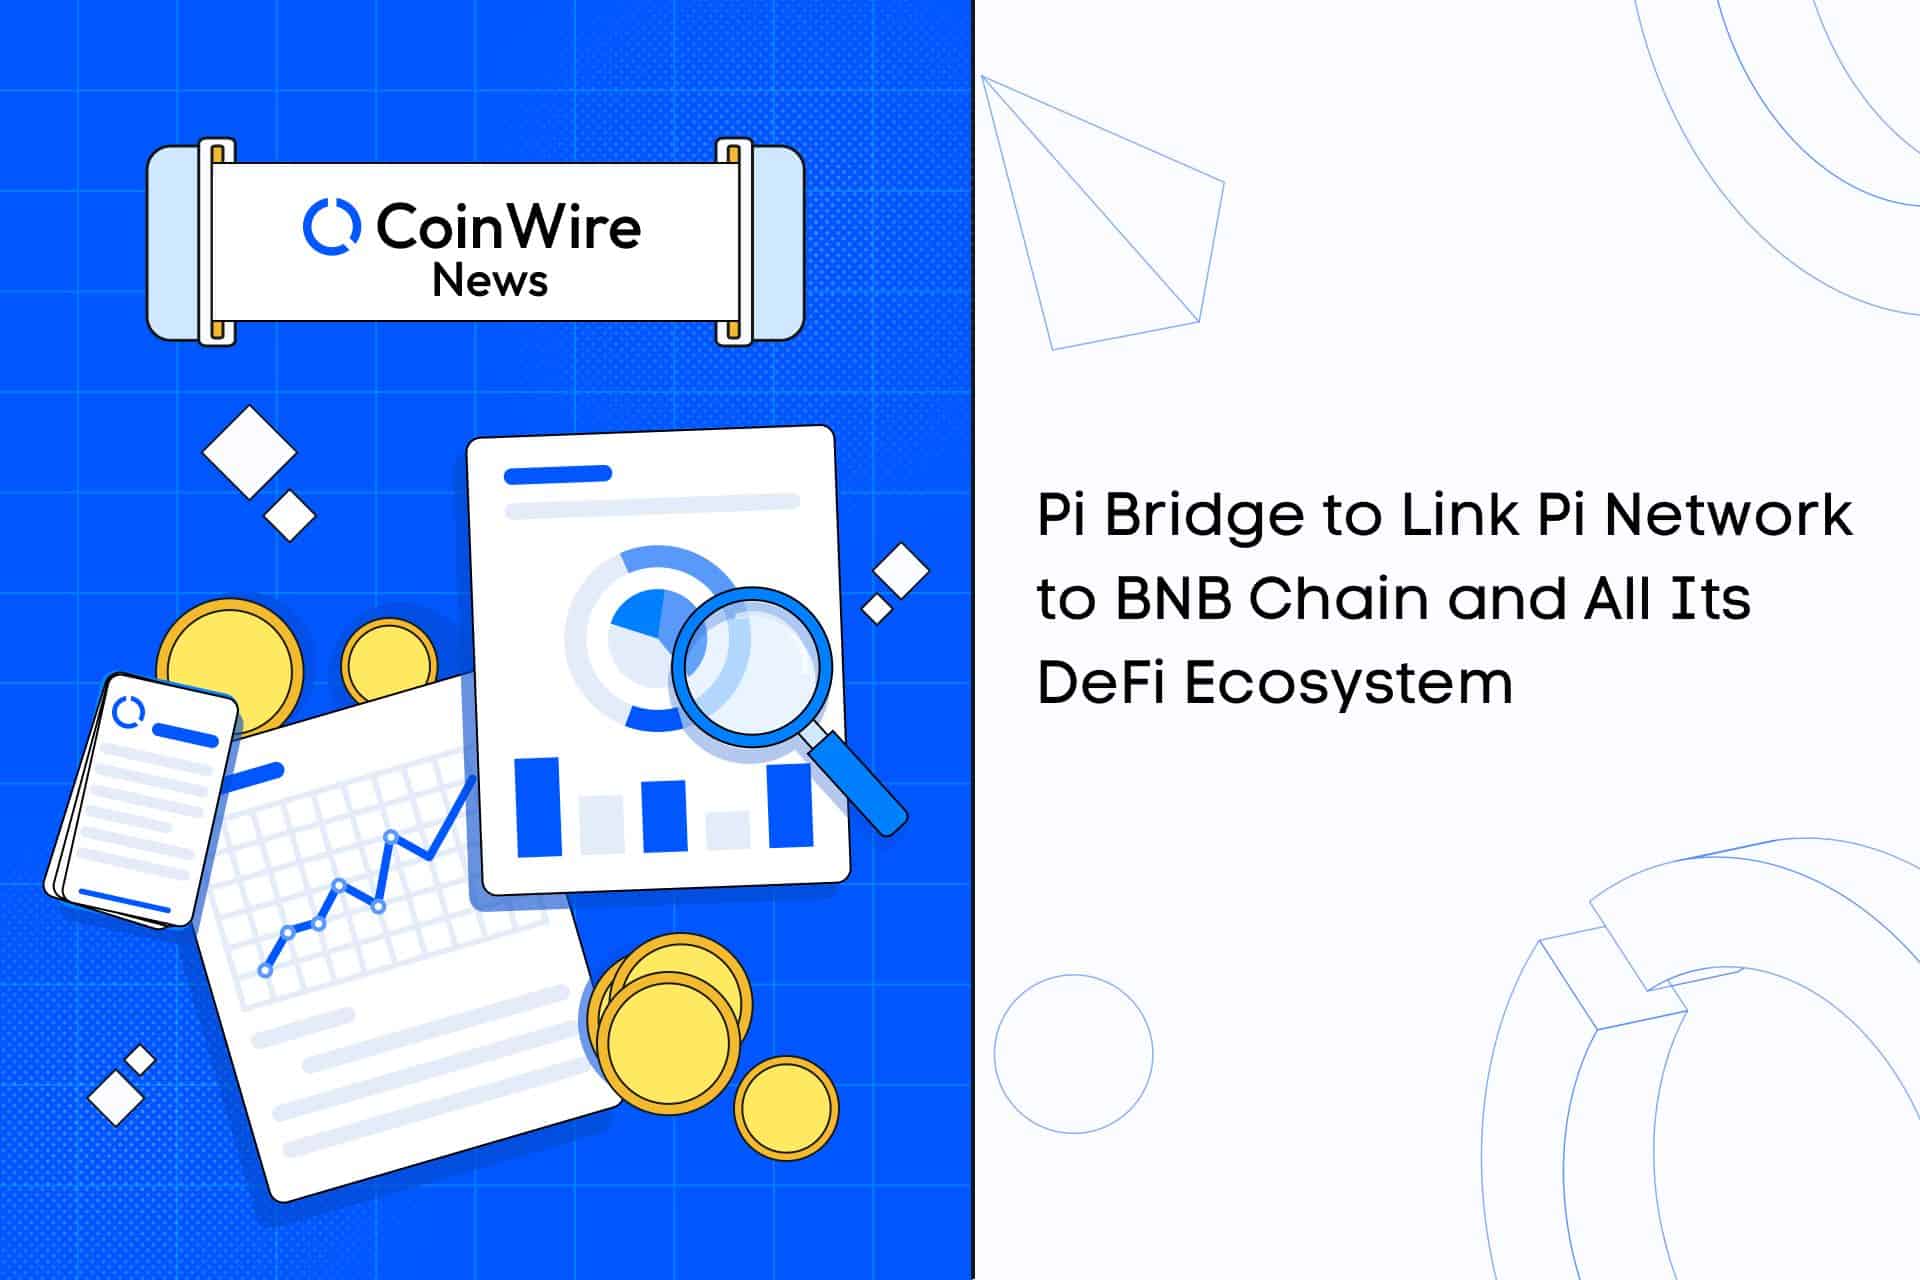 Pi Bridge To Link Pi Network To Bnb Chain And All Its Defi Ecosystem